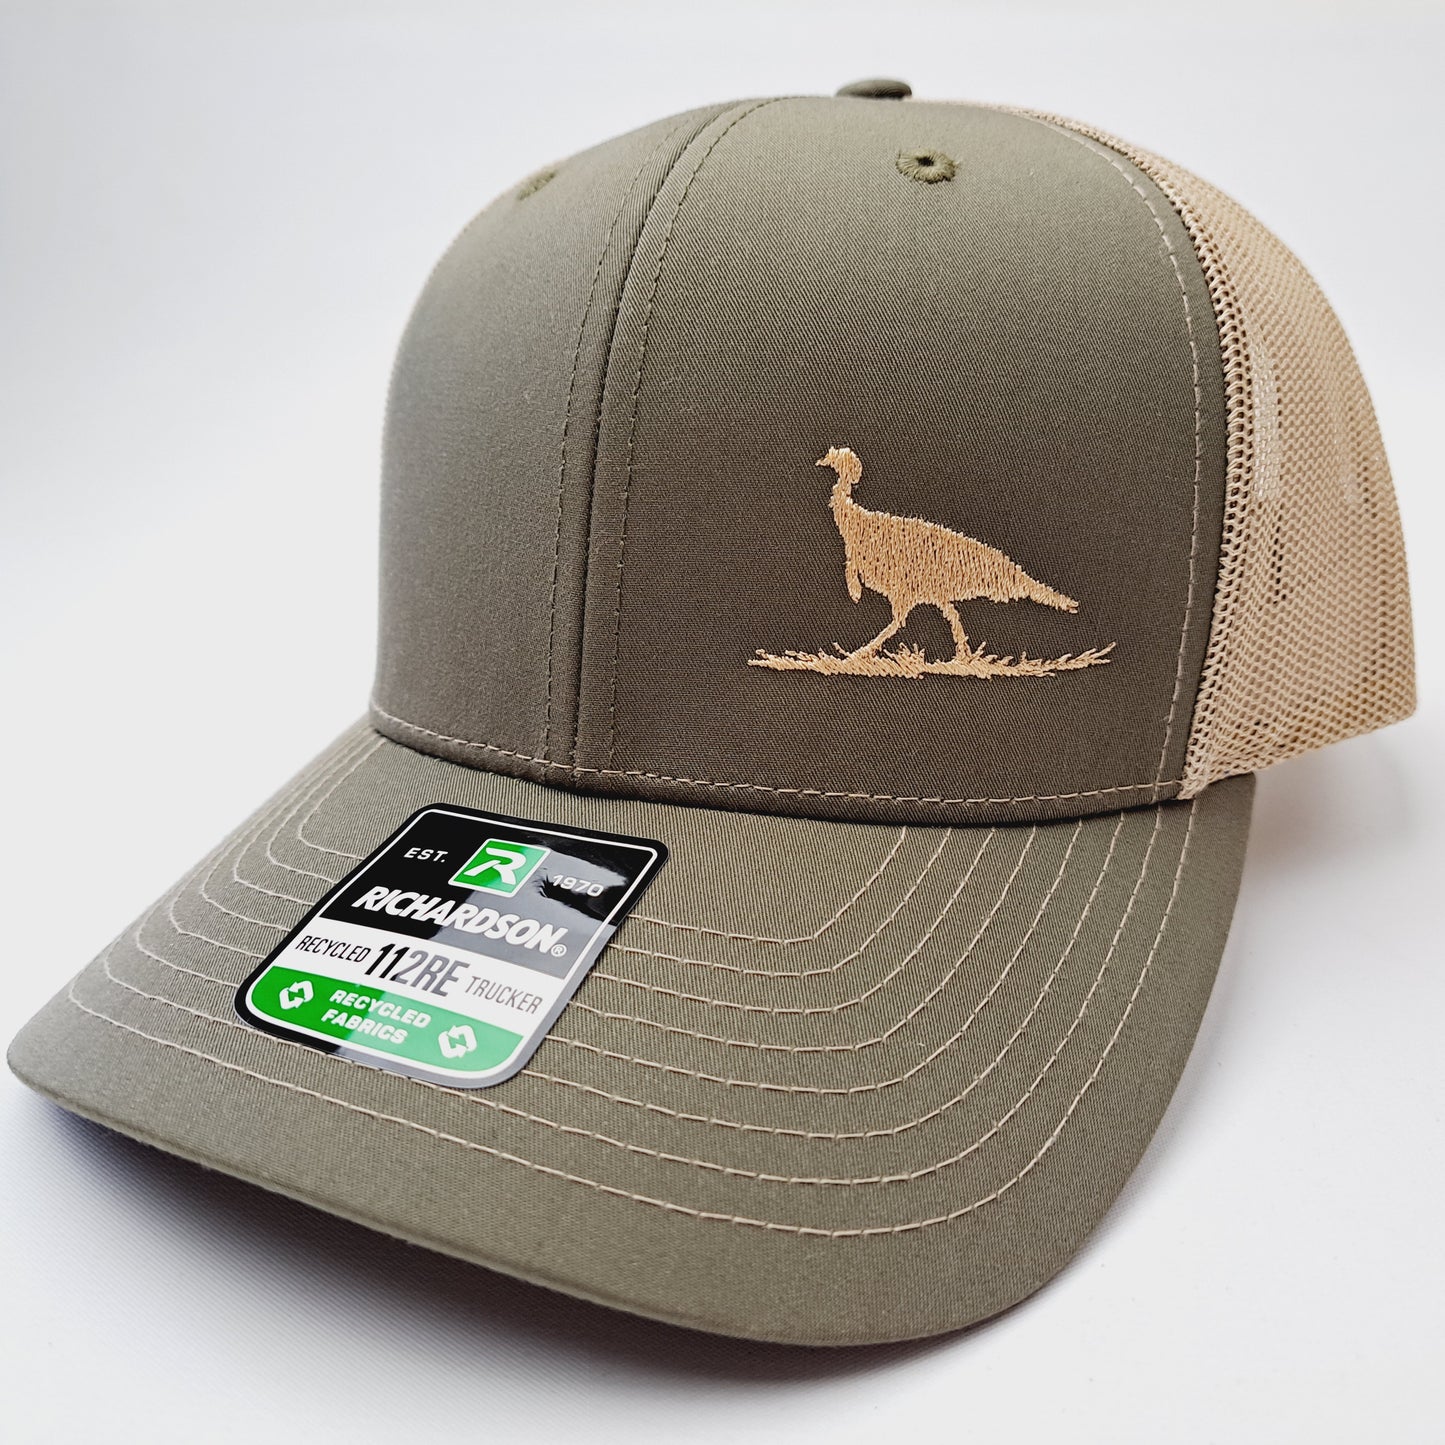 Turkey Hunter Hunting Embroidered  Richardson 112RE Curved Bill Trucker Snapback Cap Hat Loden and Tan Mesh